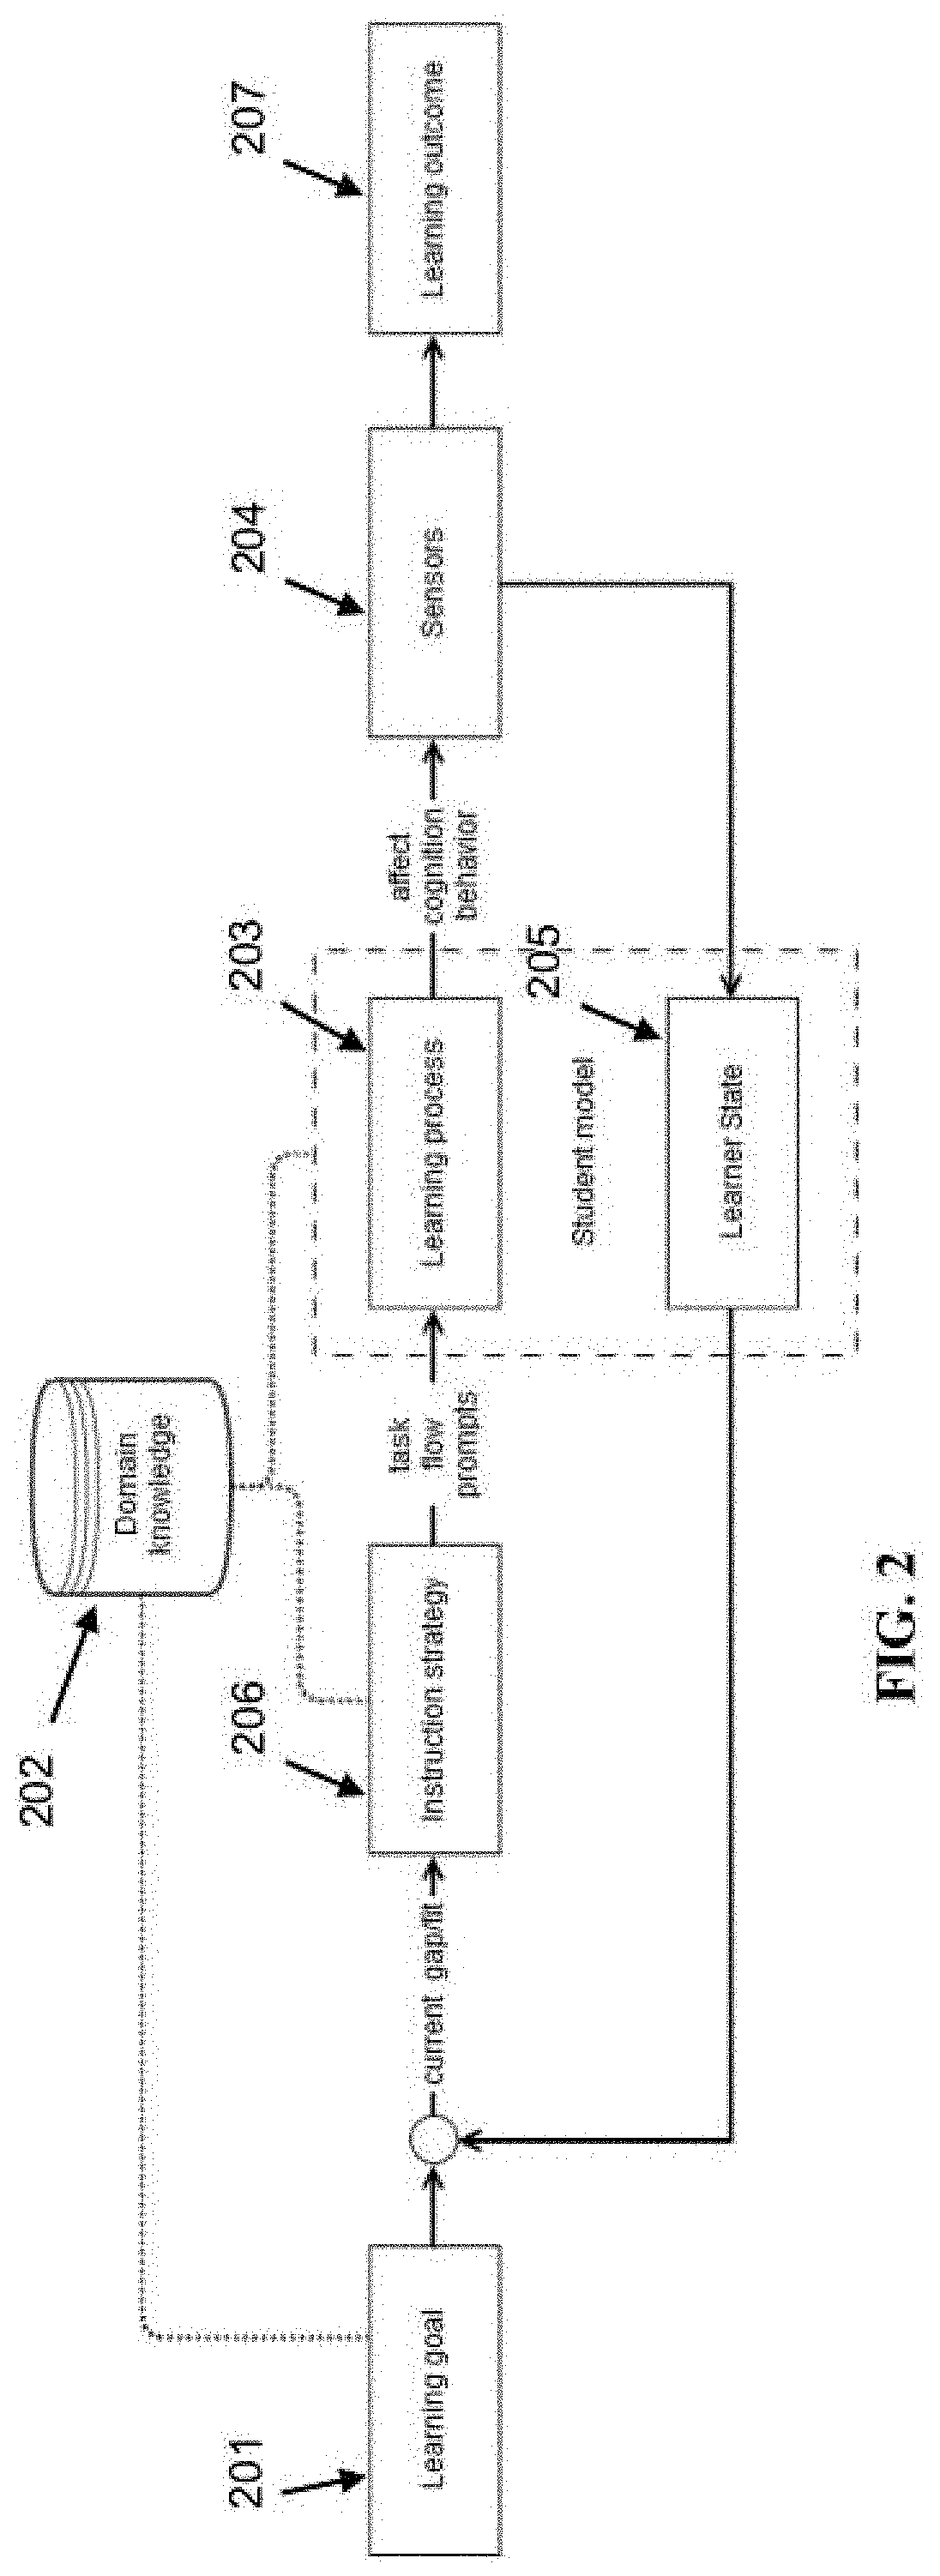 Interactive and adaptive learning, neurocognitive disorder diagnosis, and noncompliance detection systems using pupillary response and face tracking and emotion detection with associated methods